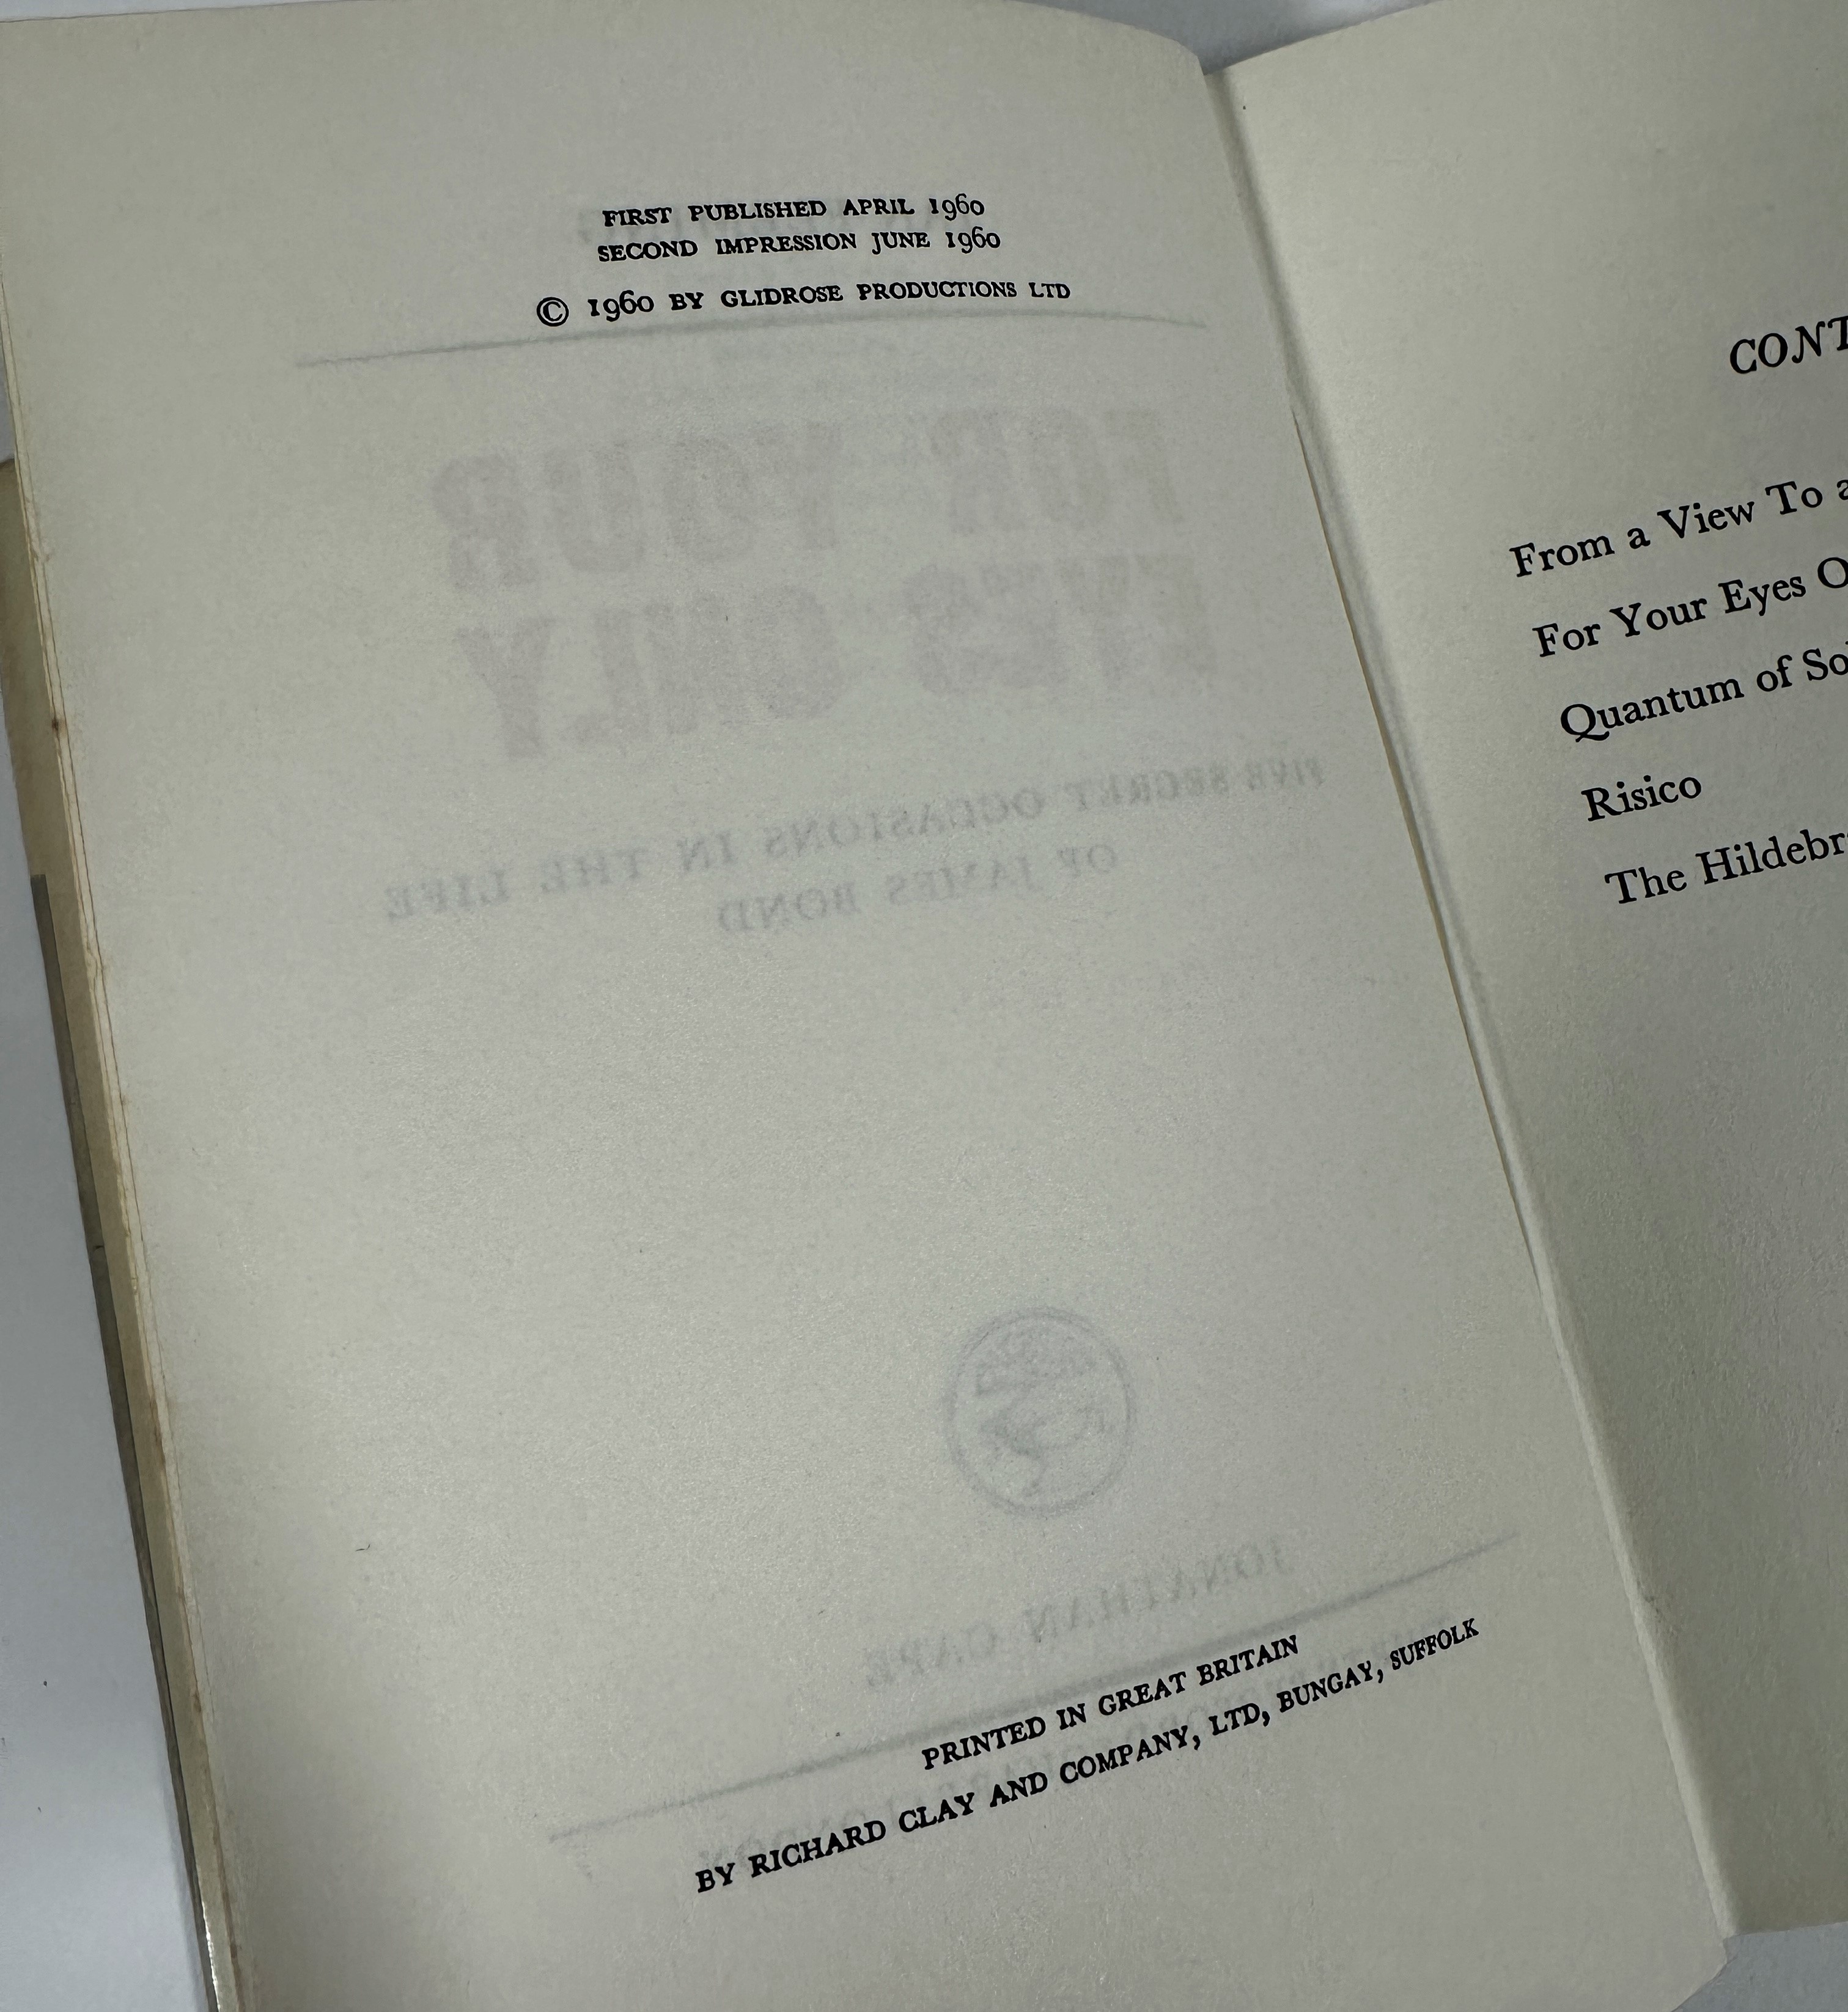 James Bond Interest:- Ian Fleming, For Your Eyes Only, Richard Clay & Co Ltd Suffolk, 1960, complete - Image 3 of 13